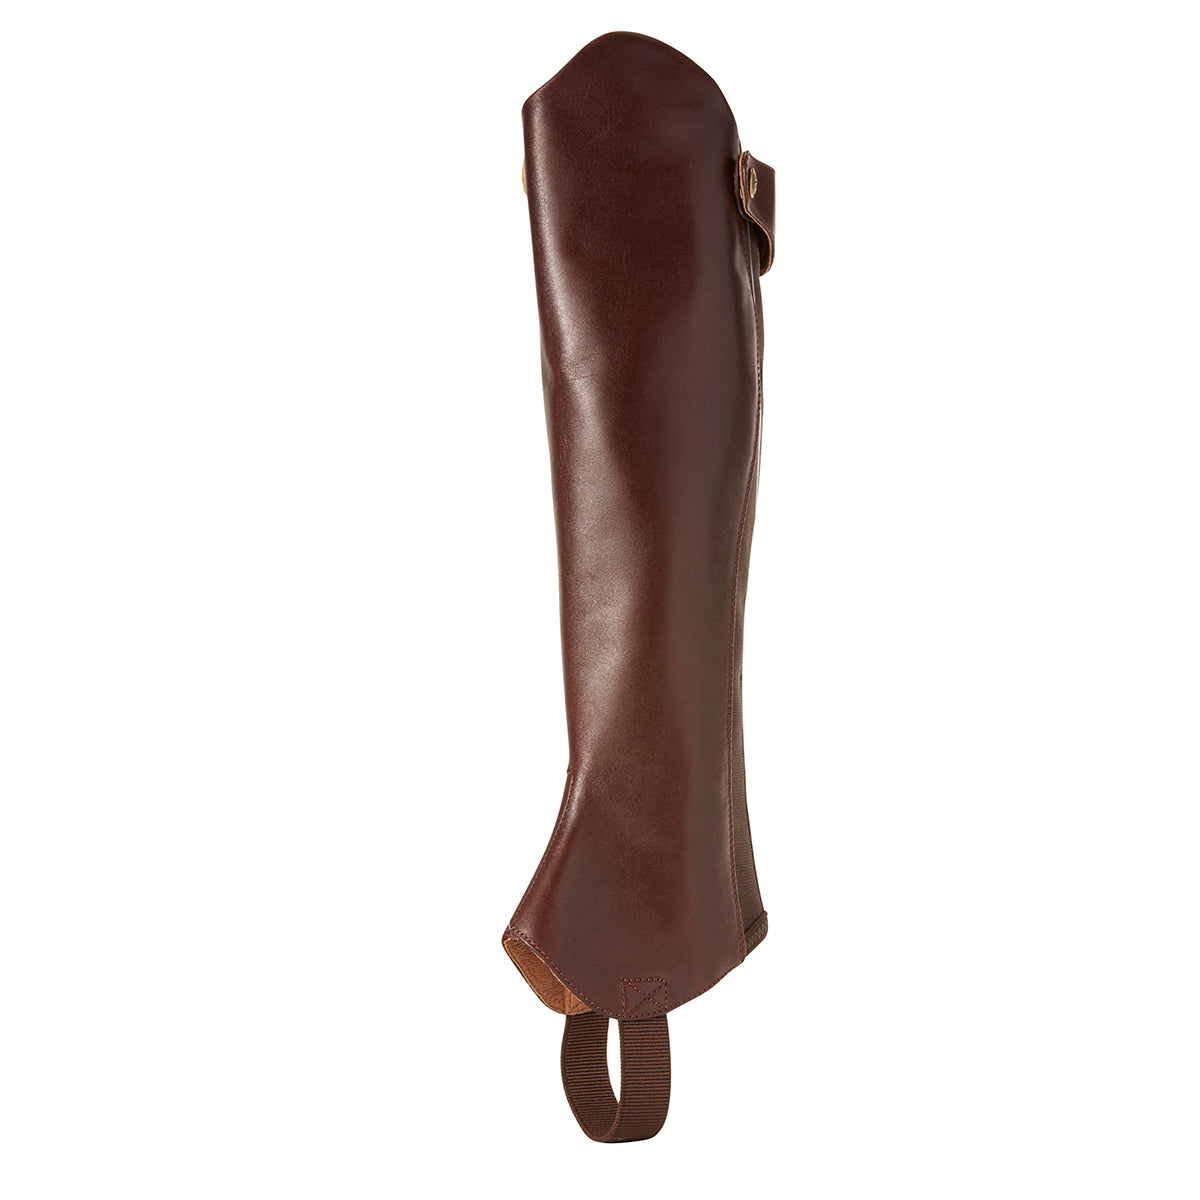 Unisex Ariat Kendron Half Chap in Mahogany from the front